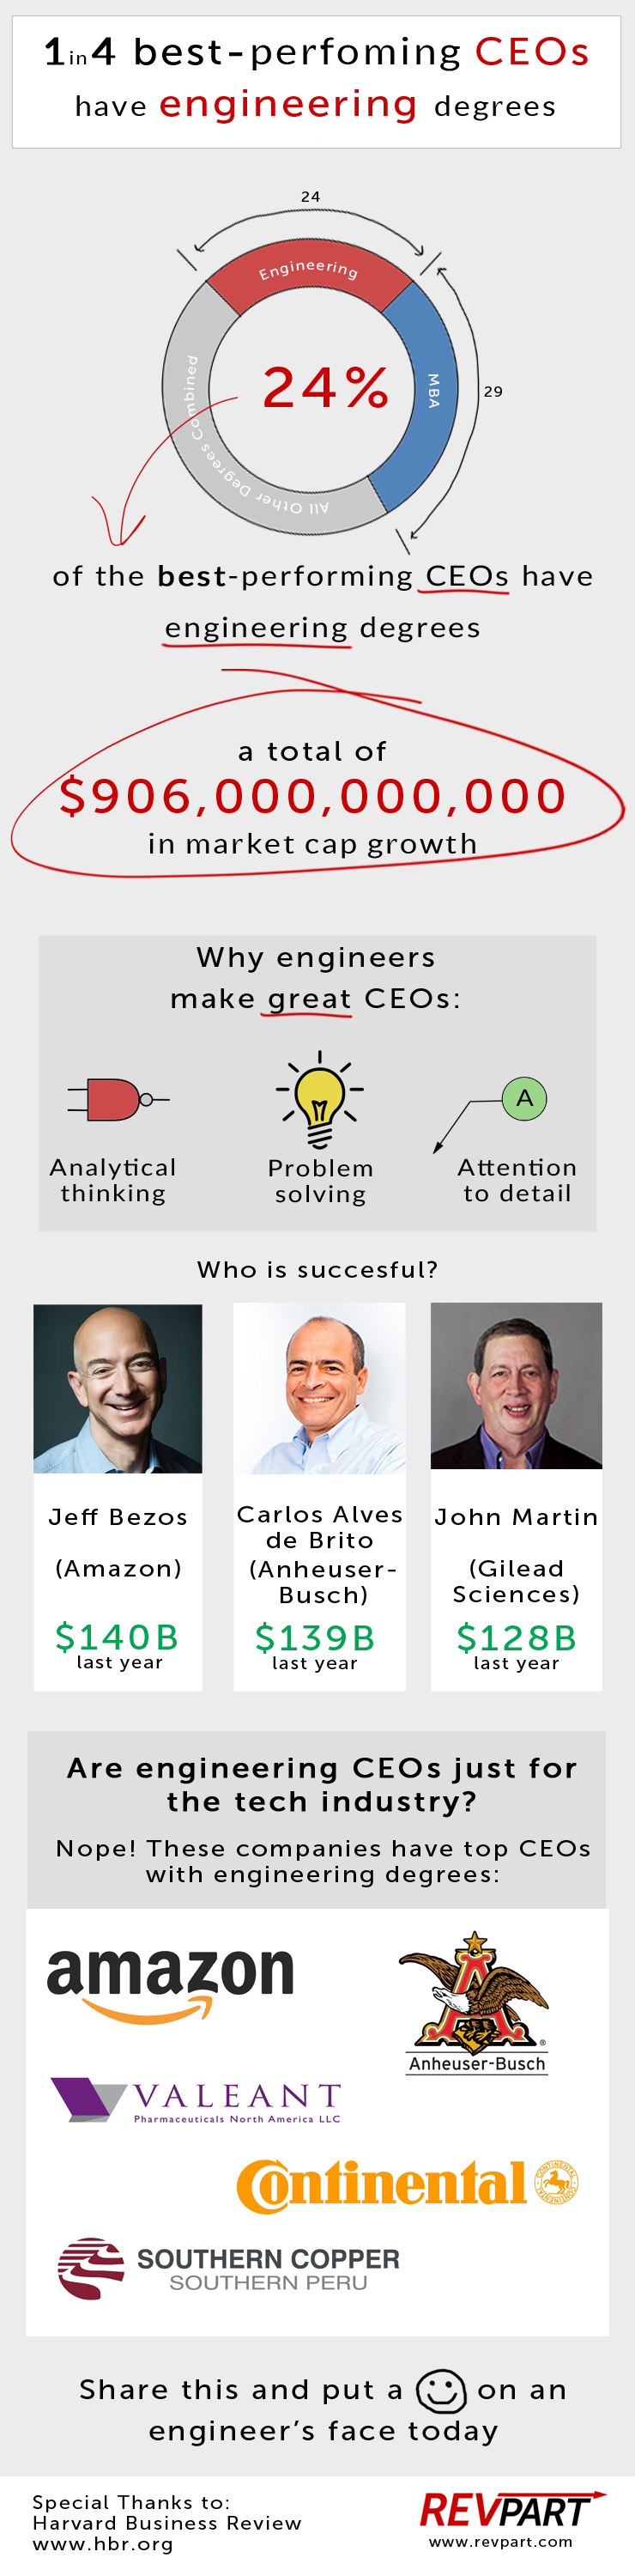 why engineers make great CEOs infographic